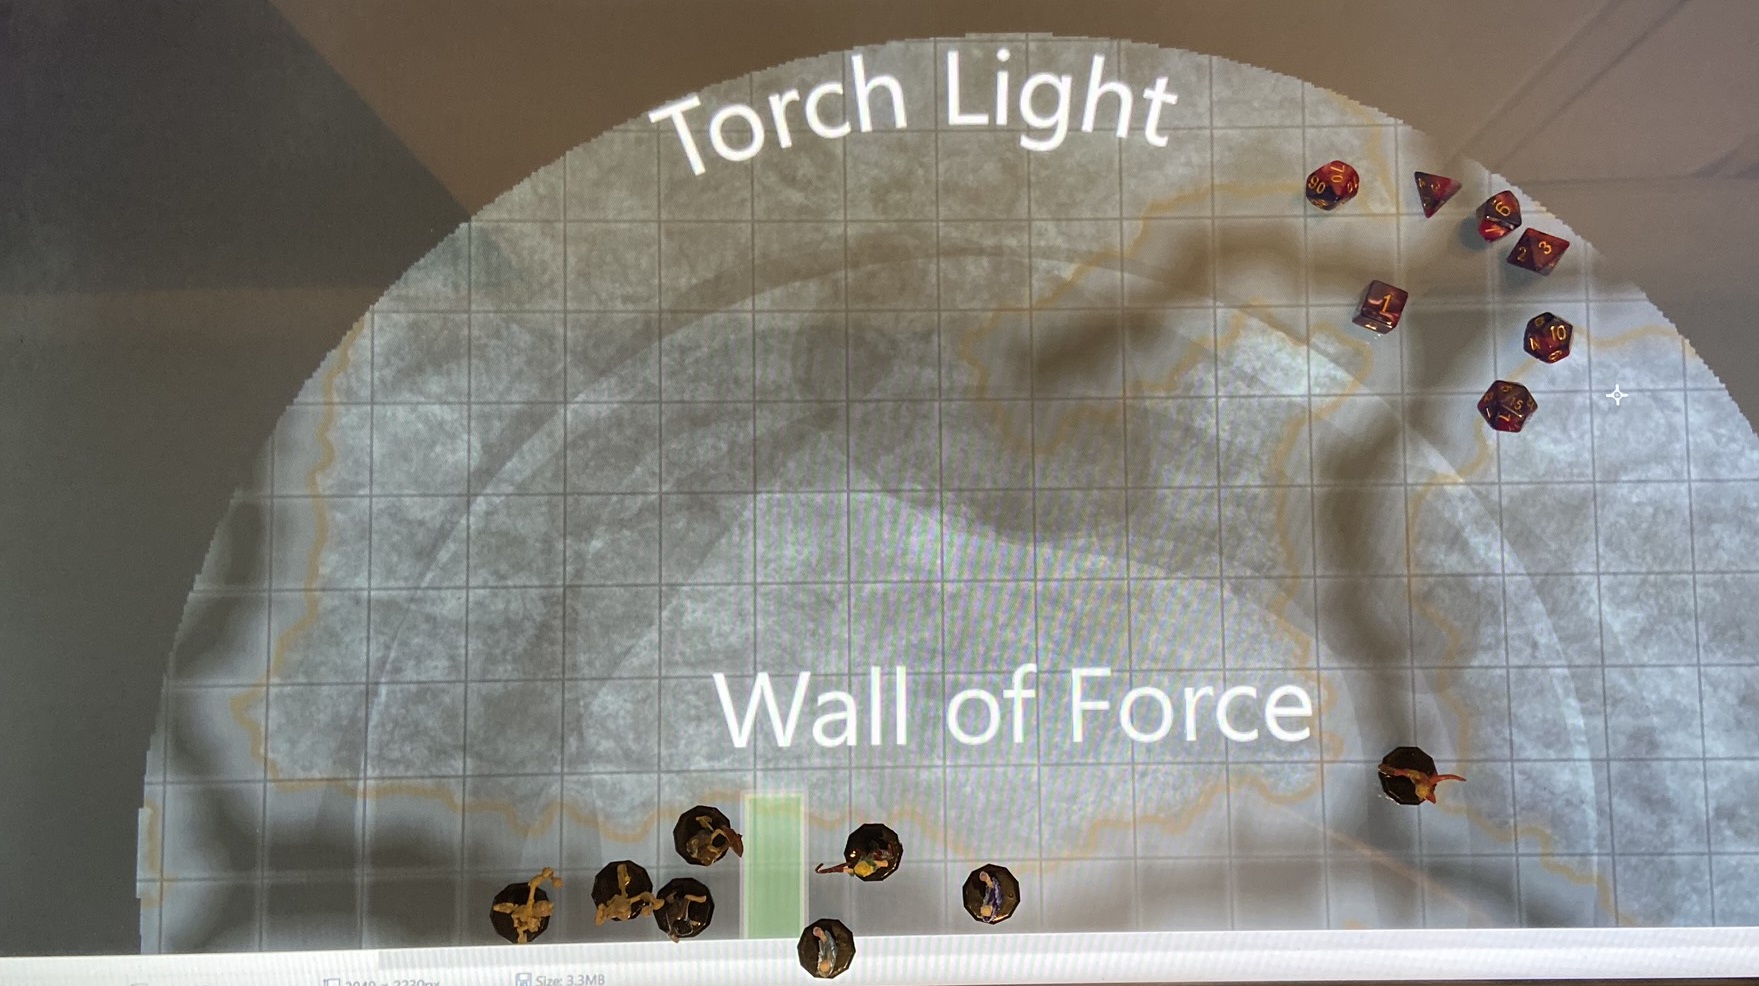 Example of Torchlight mapping, only torchlit areas can be seen